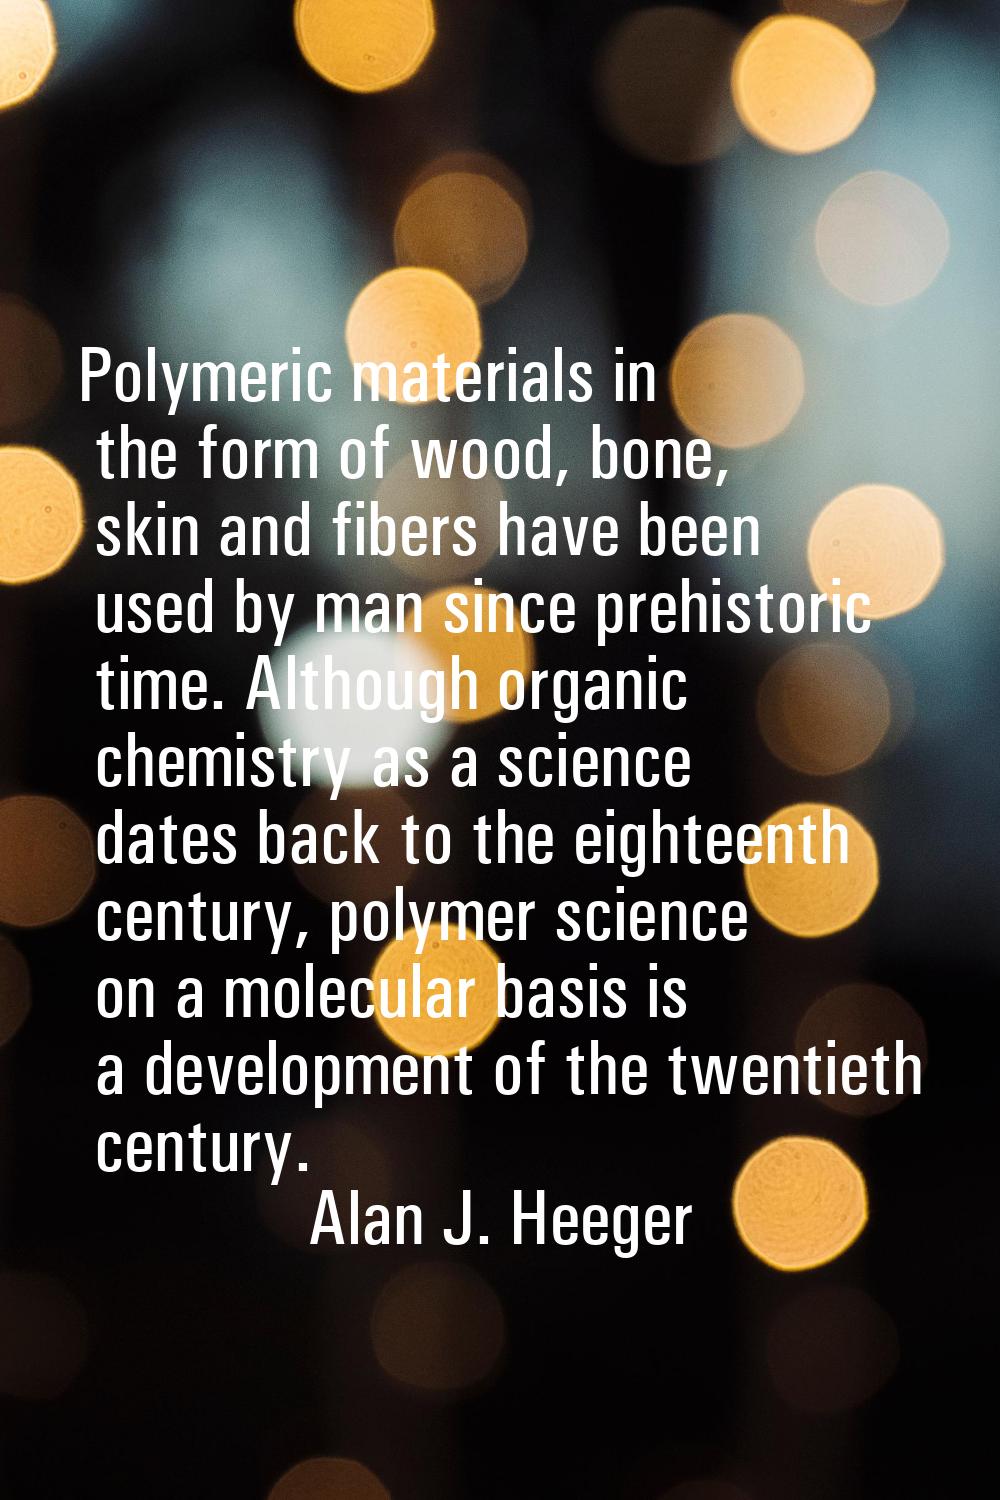 Polymeric materials in the form of wood, bone, skin and fibers have been used by man since prehisto